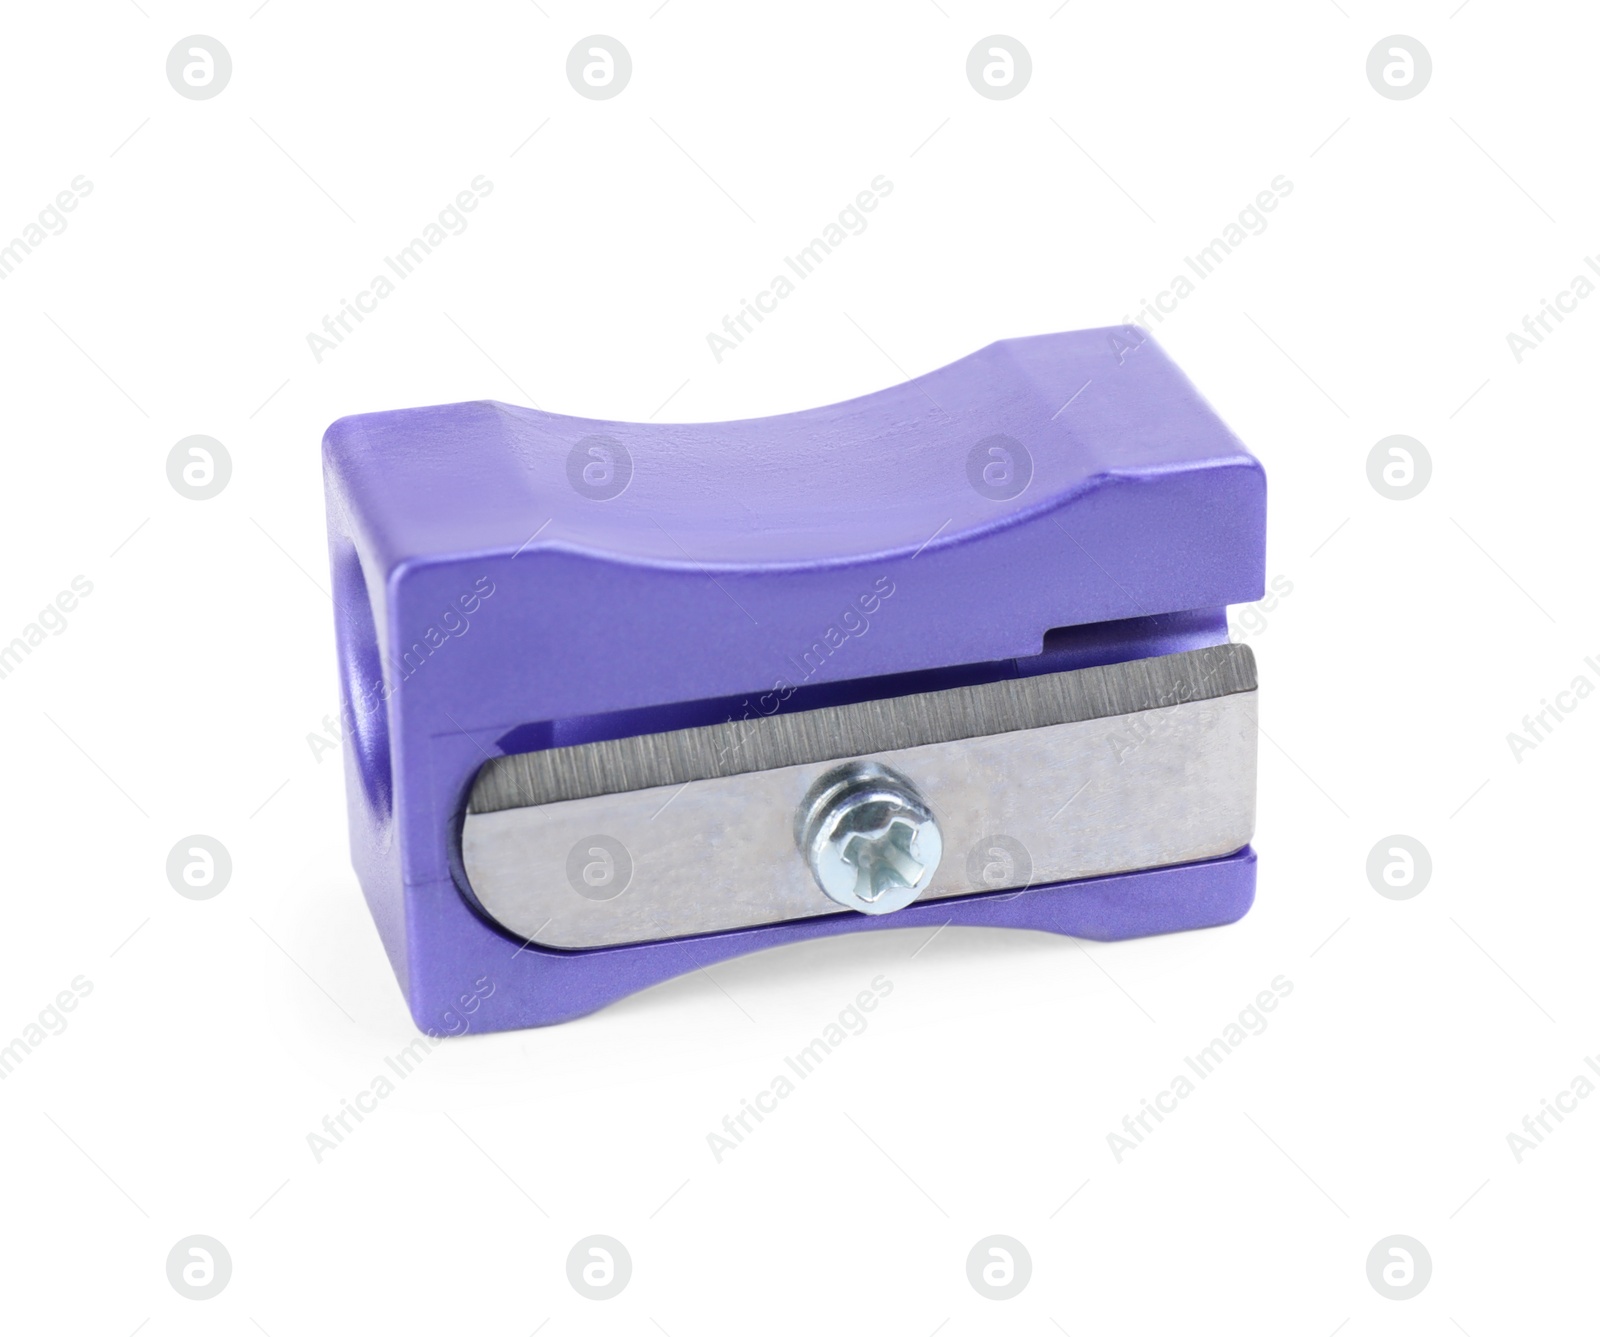 Photo of Plastic violet pencil sharpener isolated on white